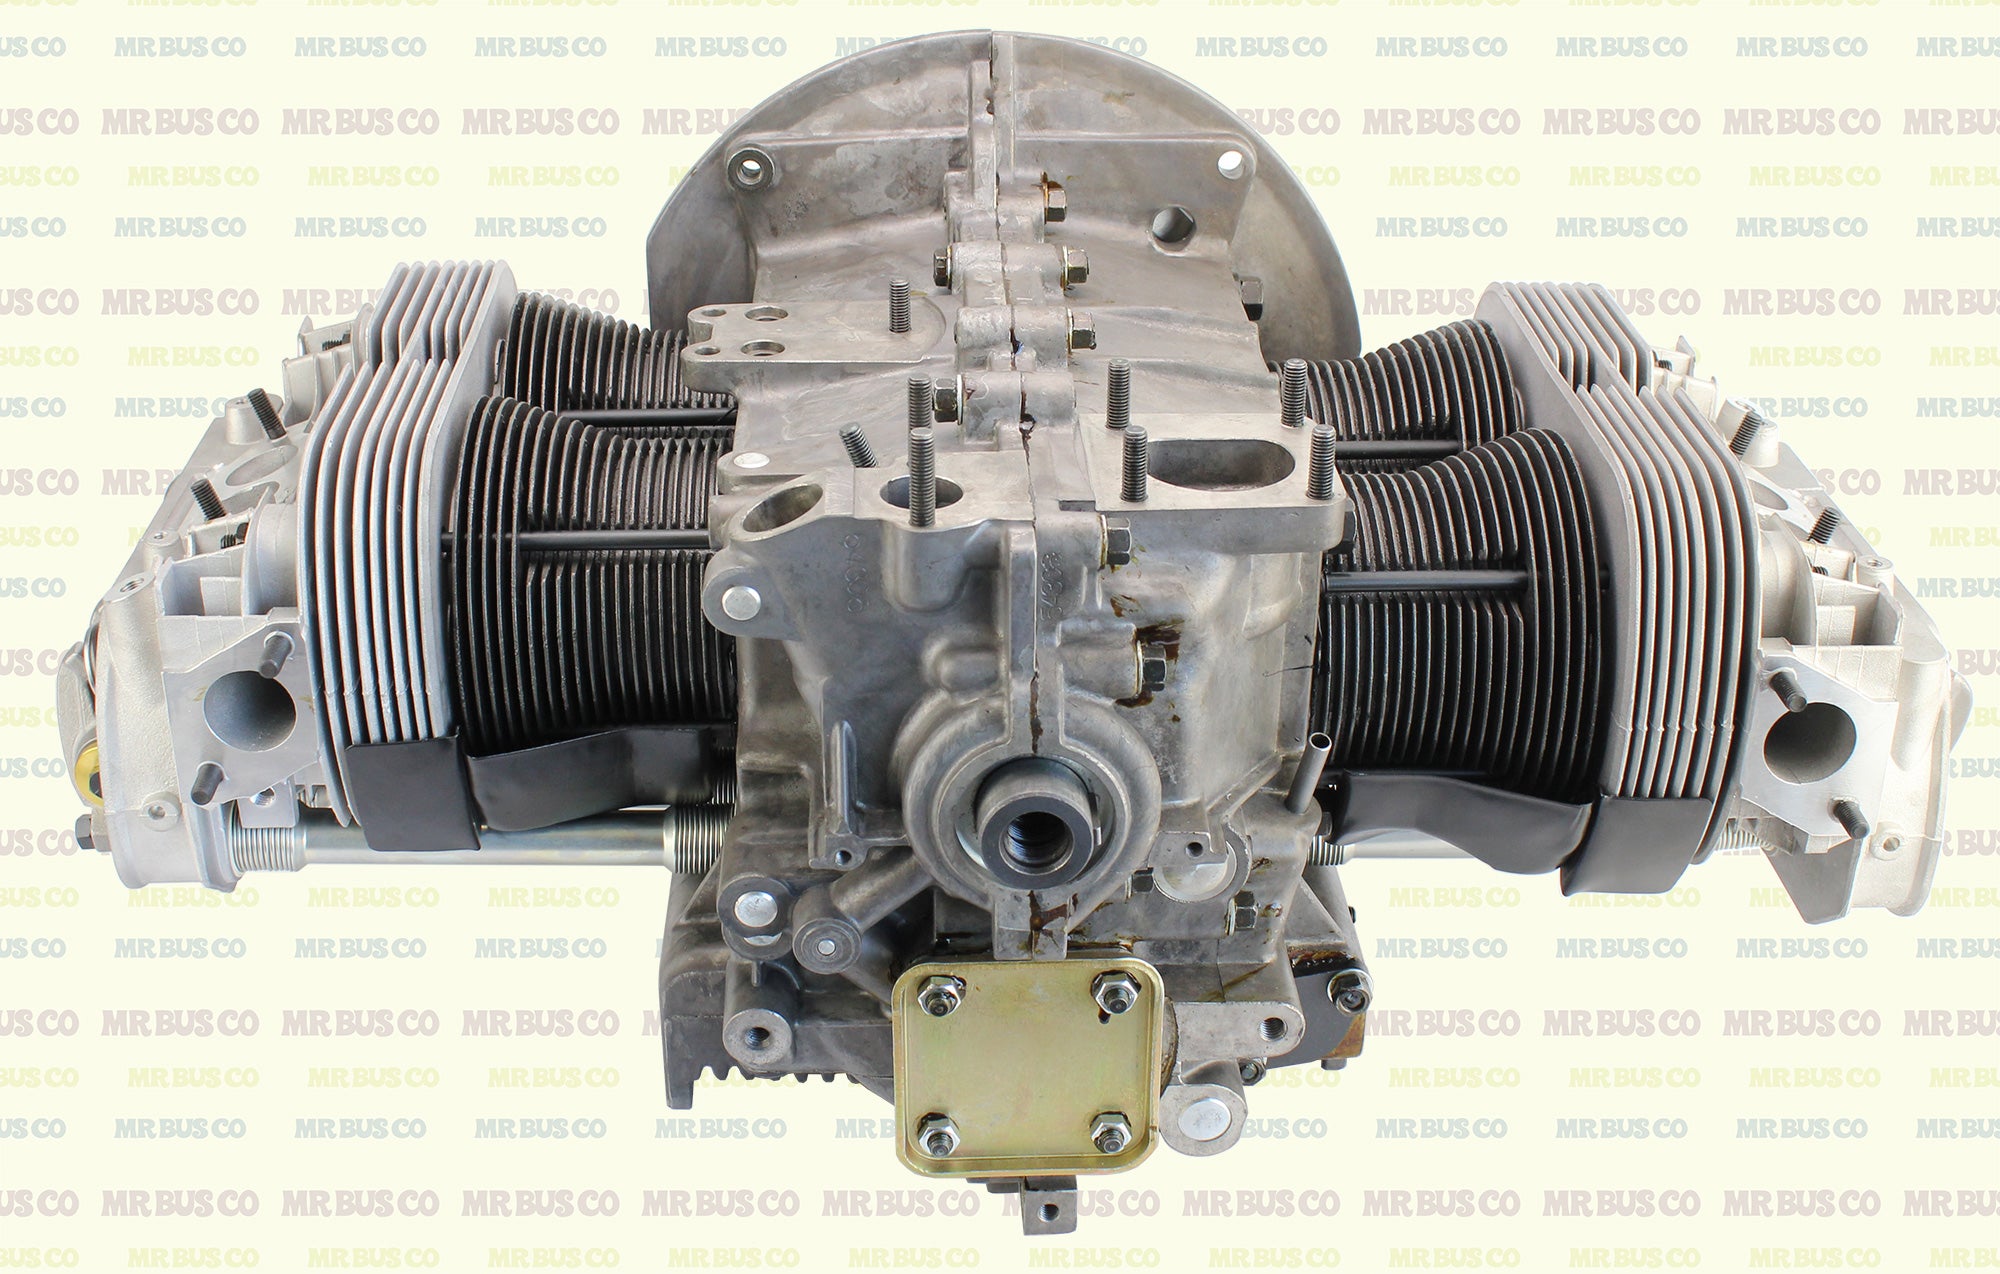 NEW 1776cc Dual Port Long Block Engine for Dual Carbs